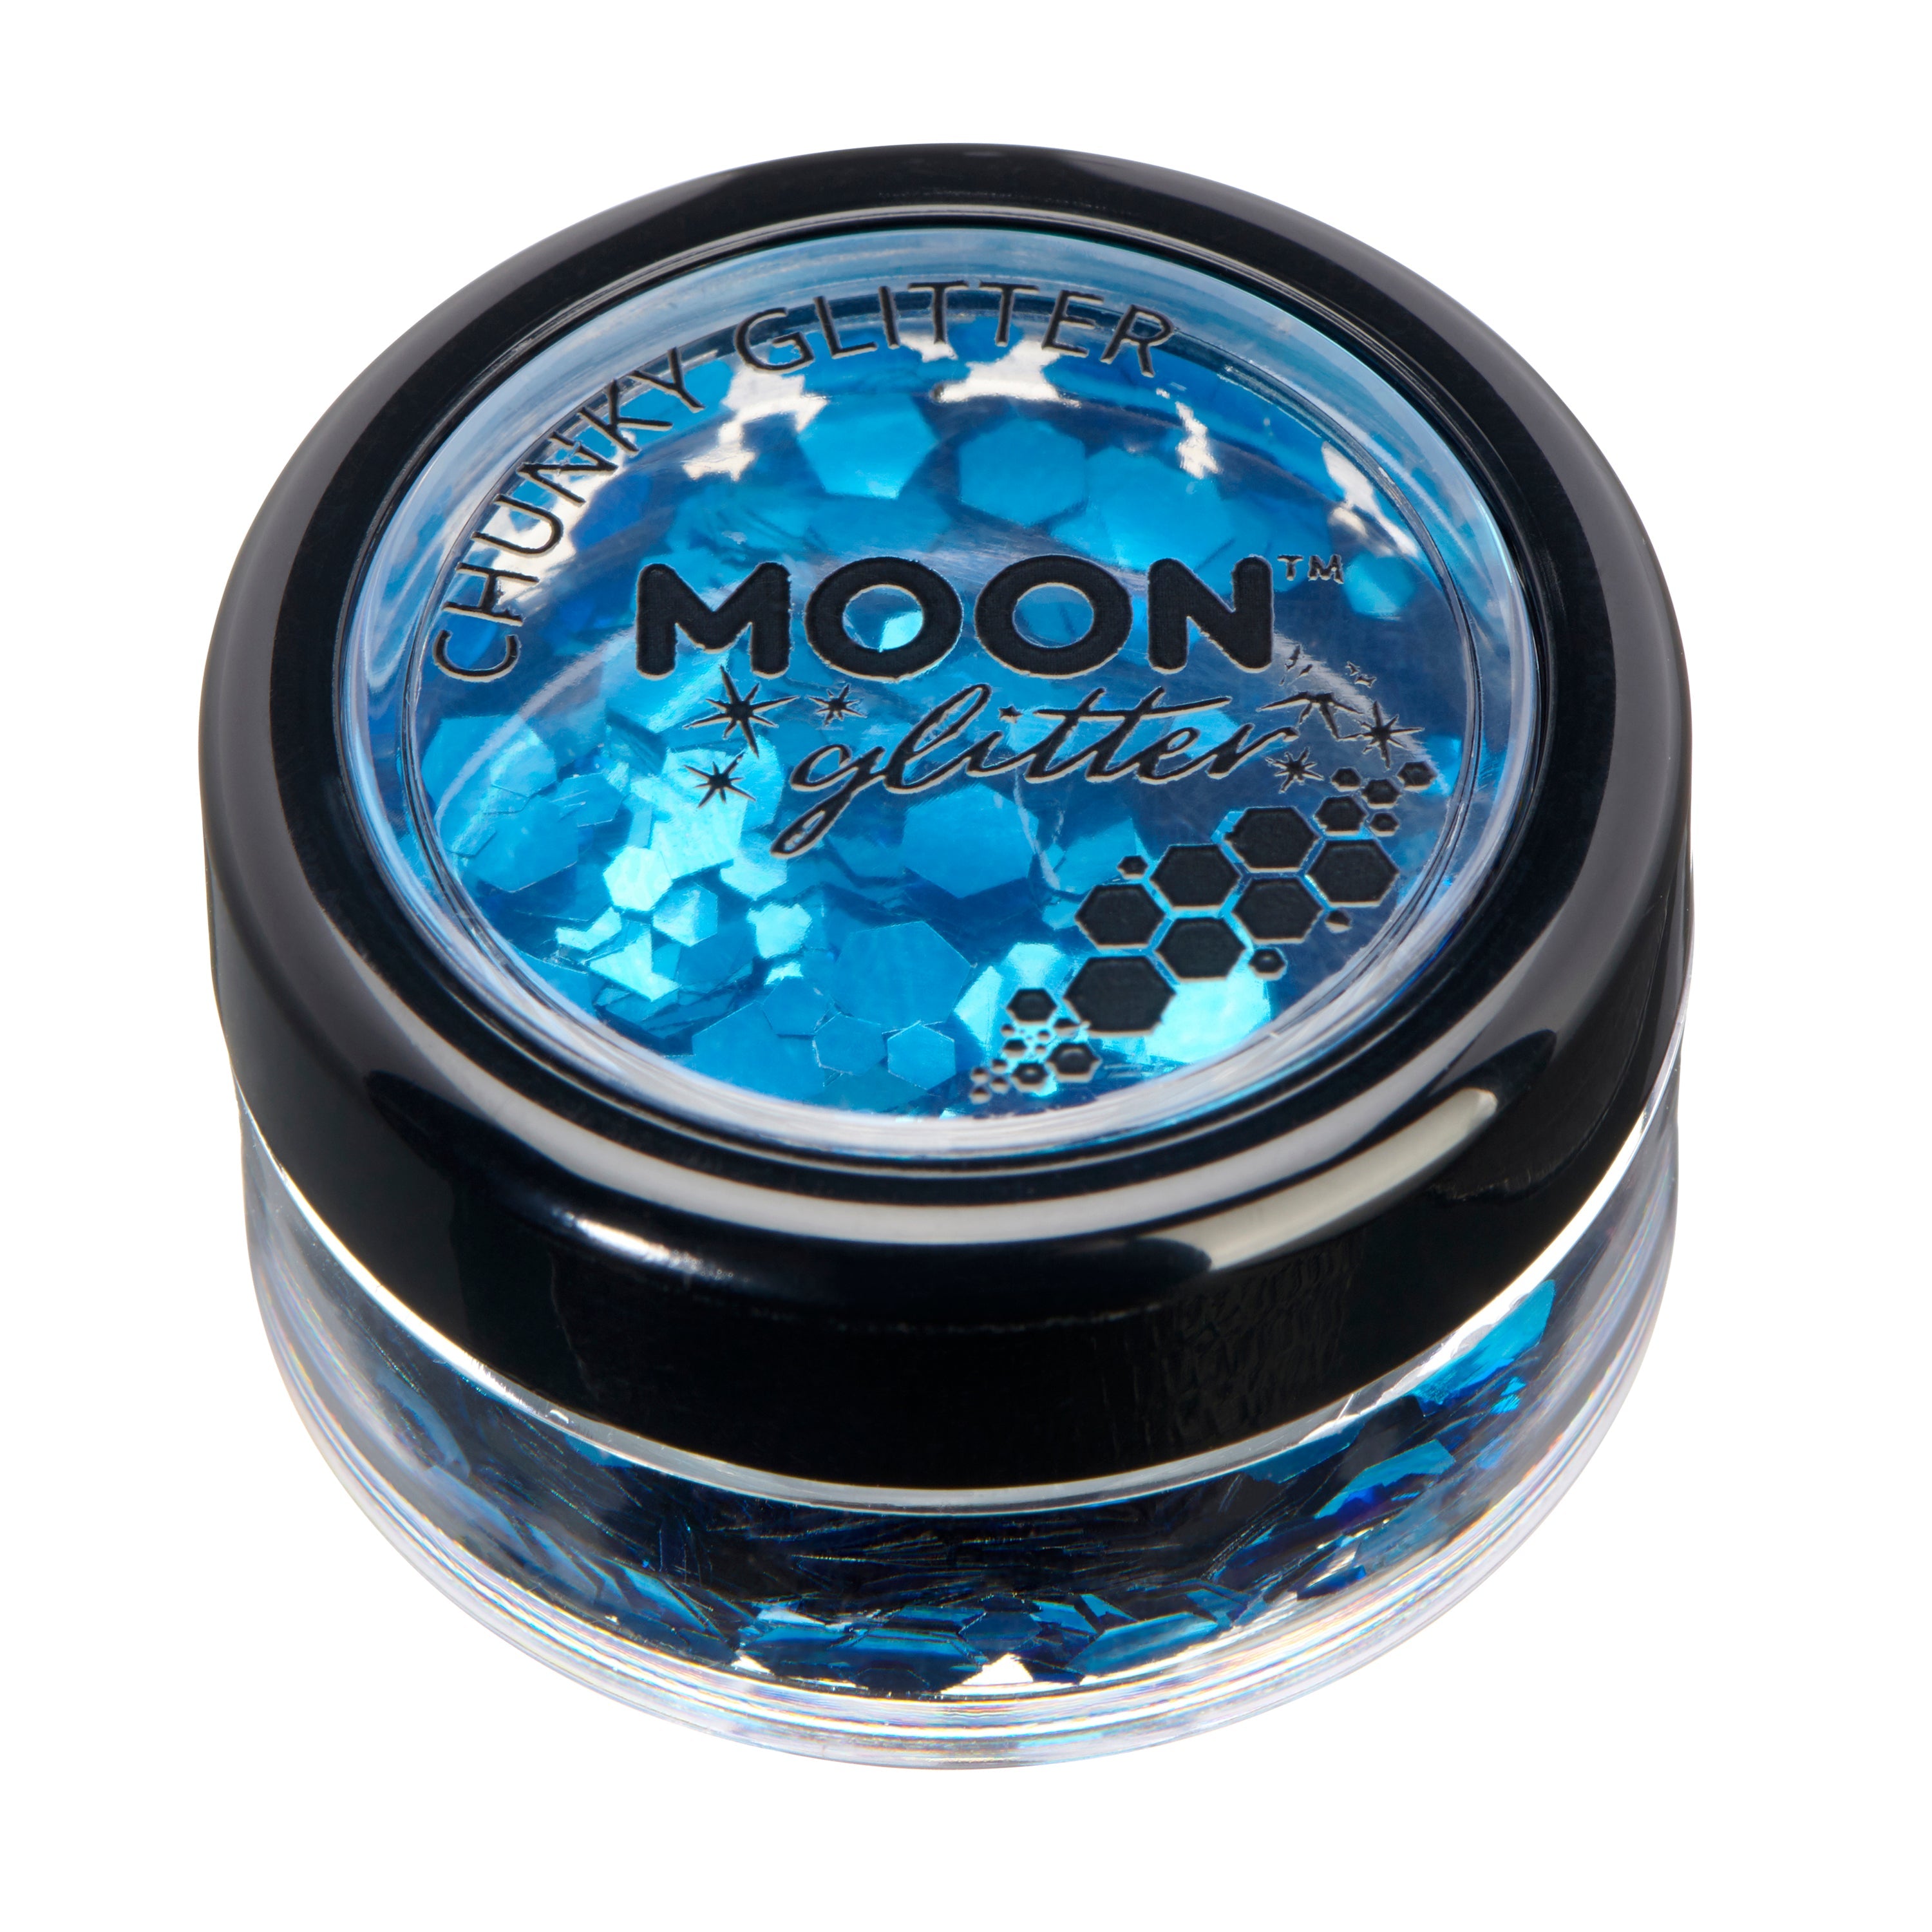 Blue - Classic Chunky Face & Body Glitter, 3g. Cosmetically certified, FDA & Health Canada compliant, cruelty free and vegan.